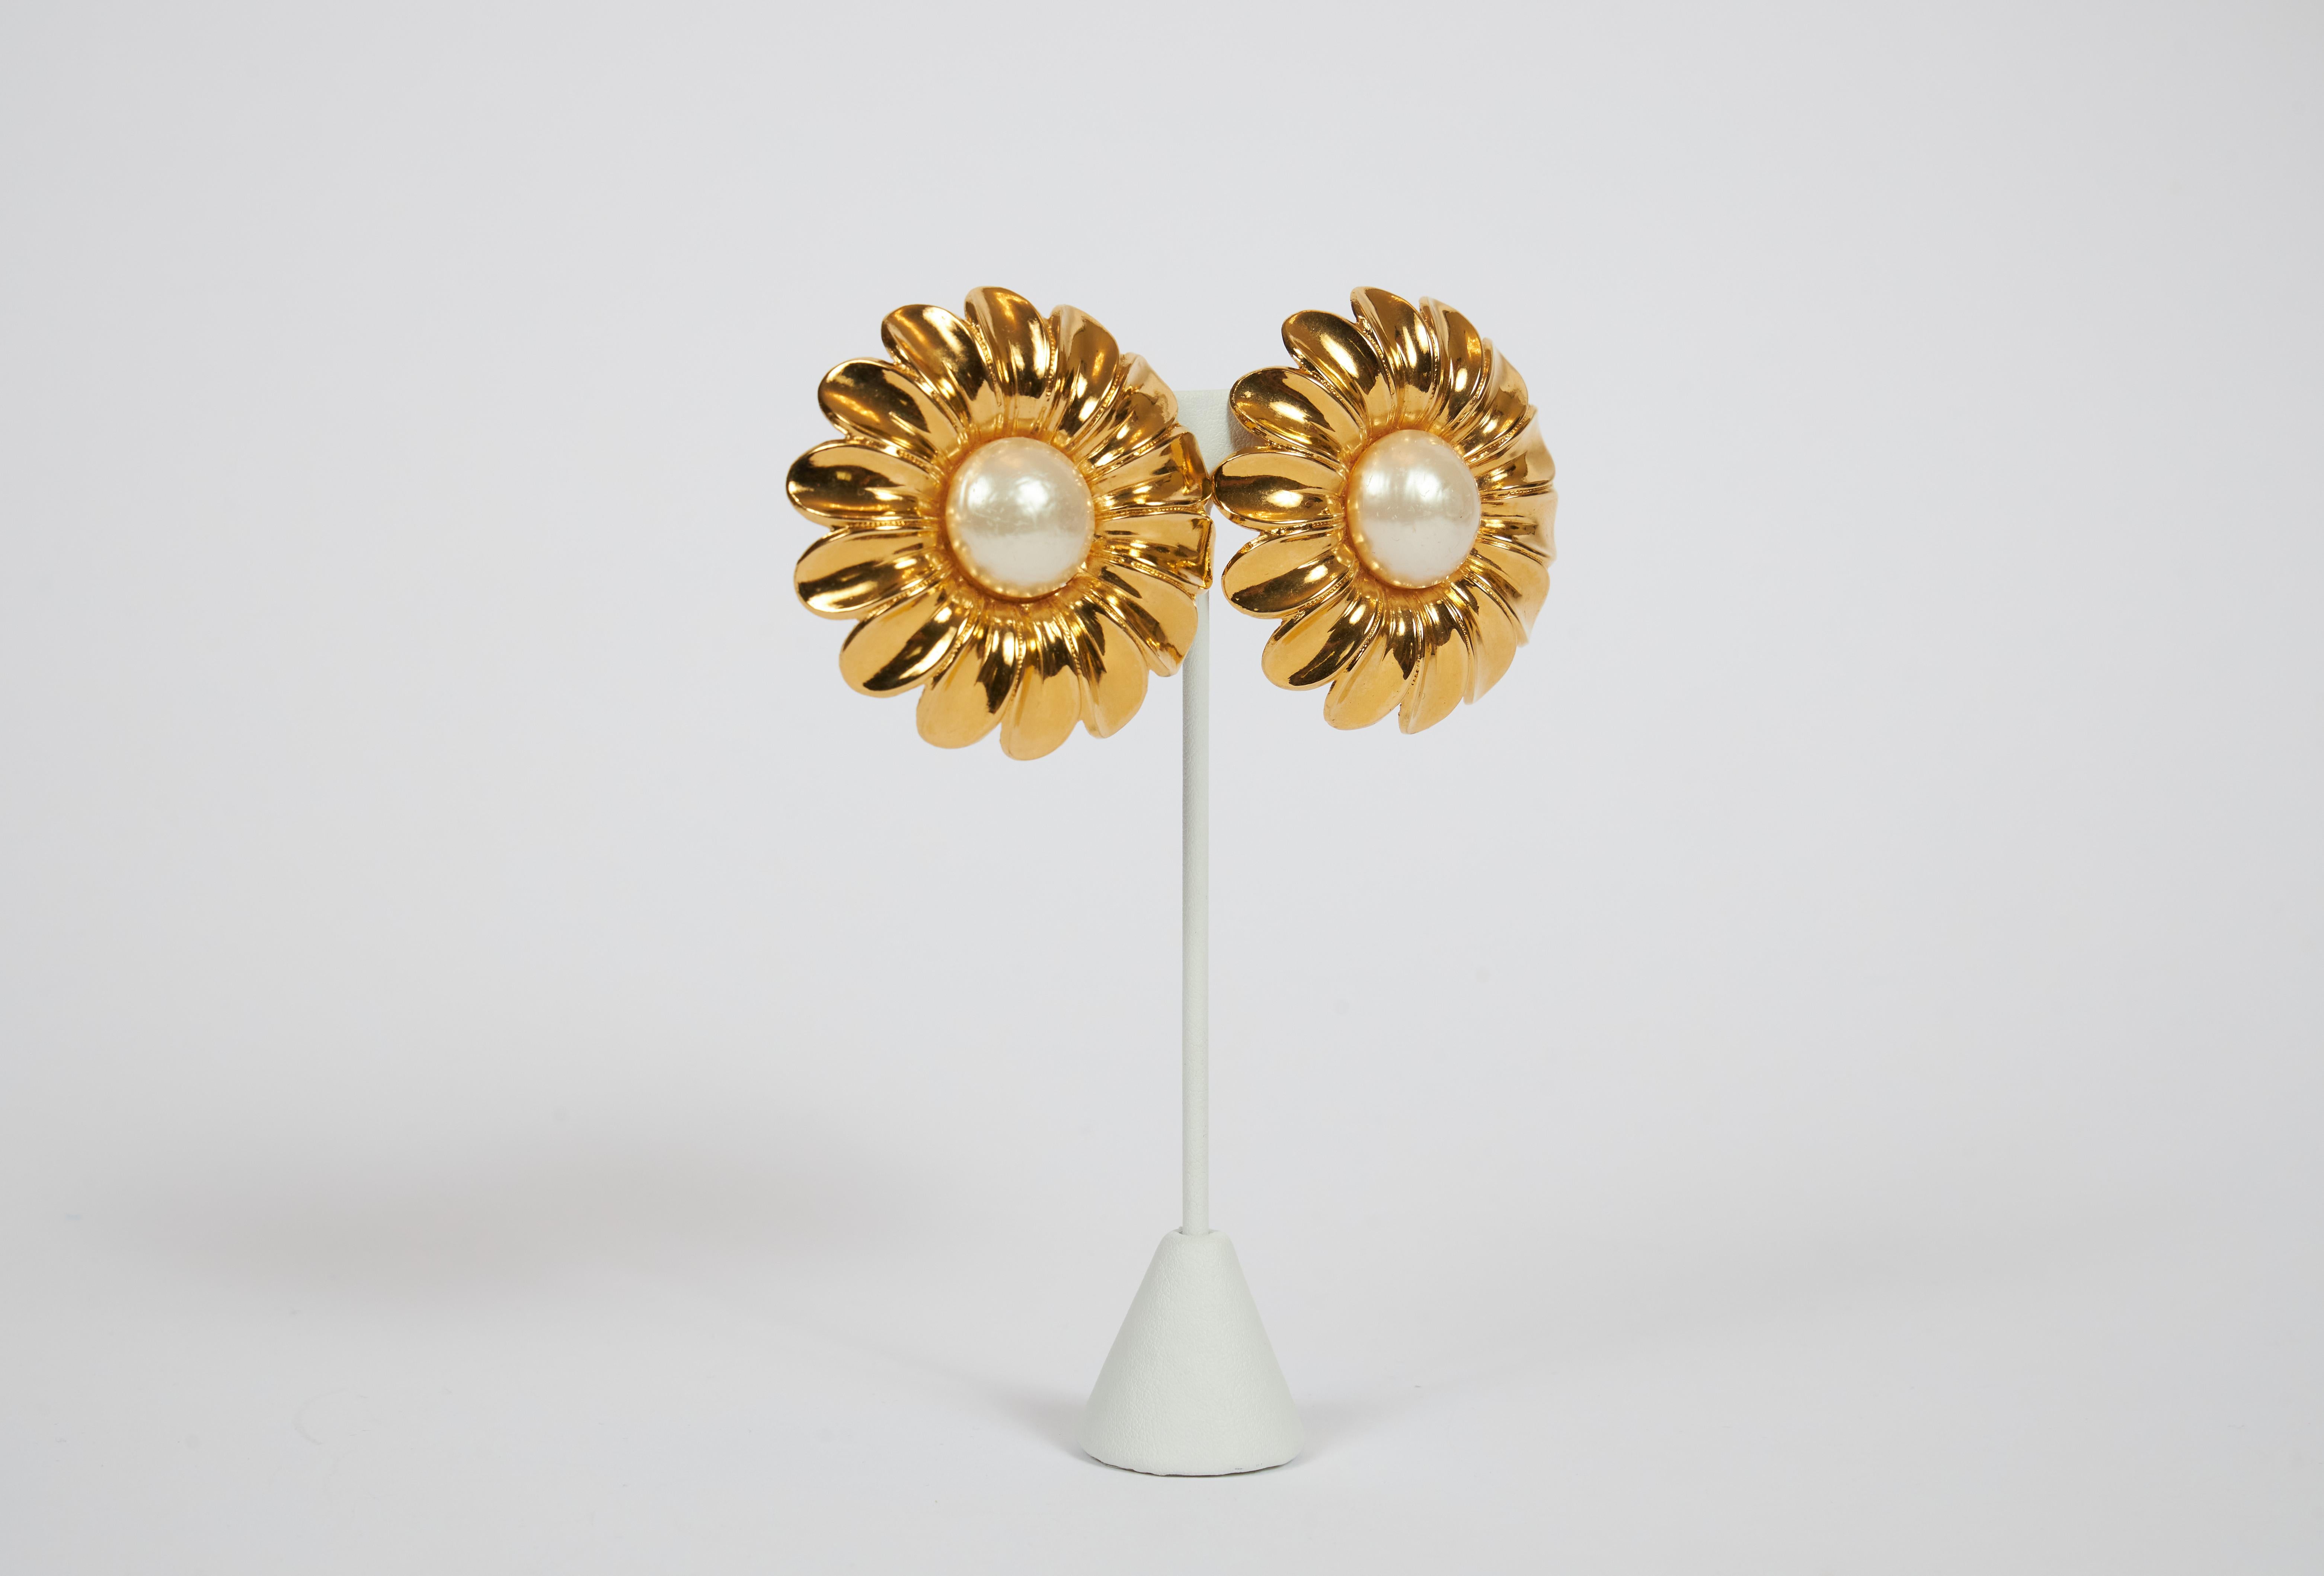 Chanel oversized and collectible daisy clip earrings with center faux made pearl. Come with original box.